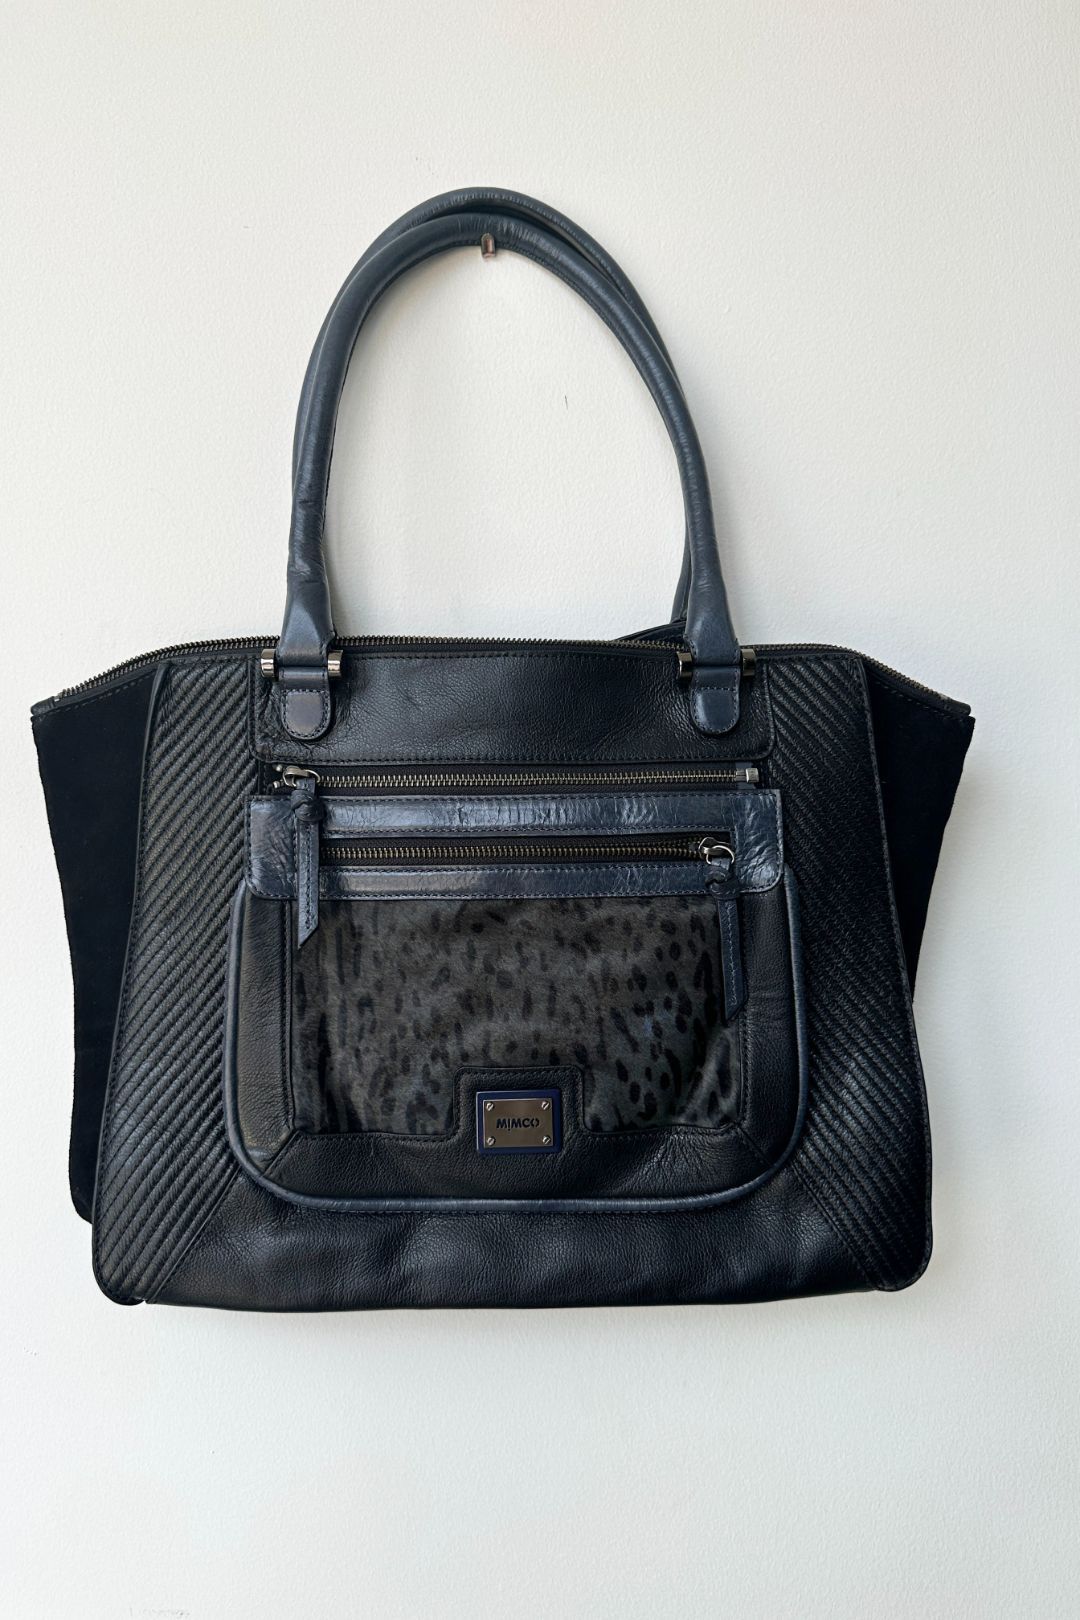 Mimco Black Leather Bowler Style Bag